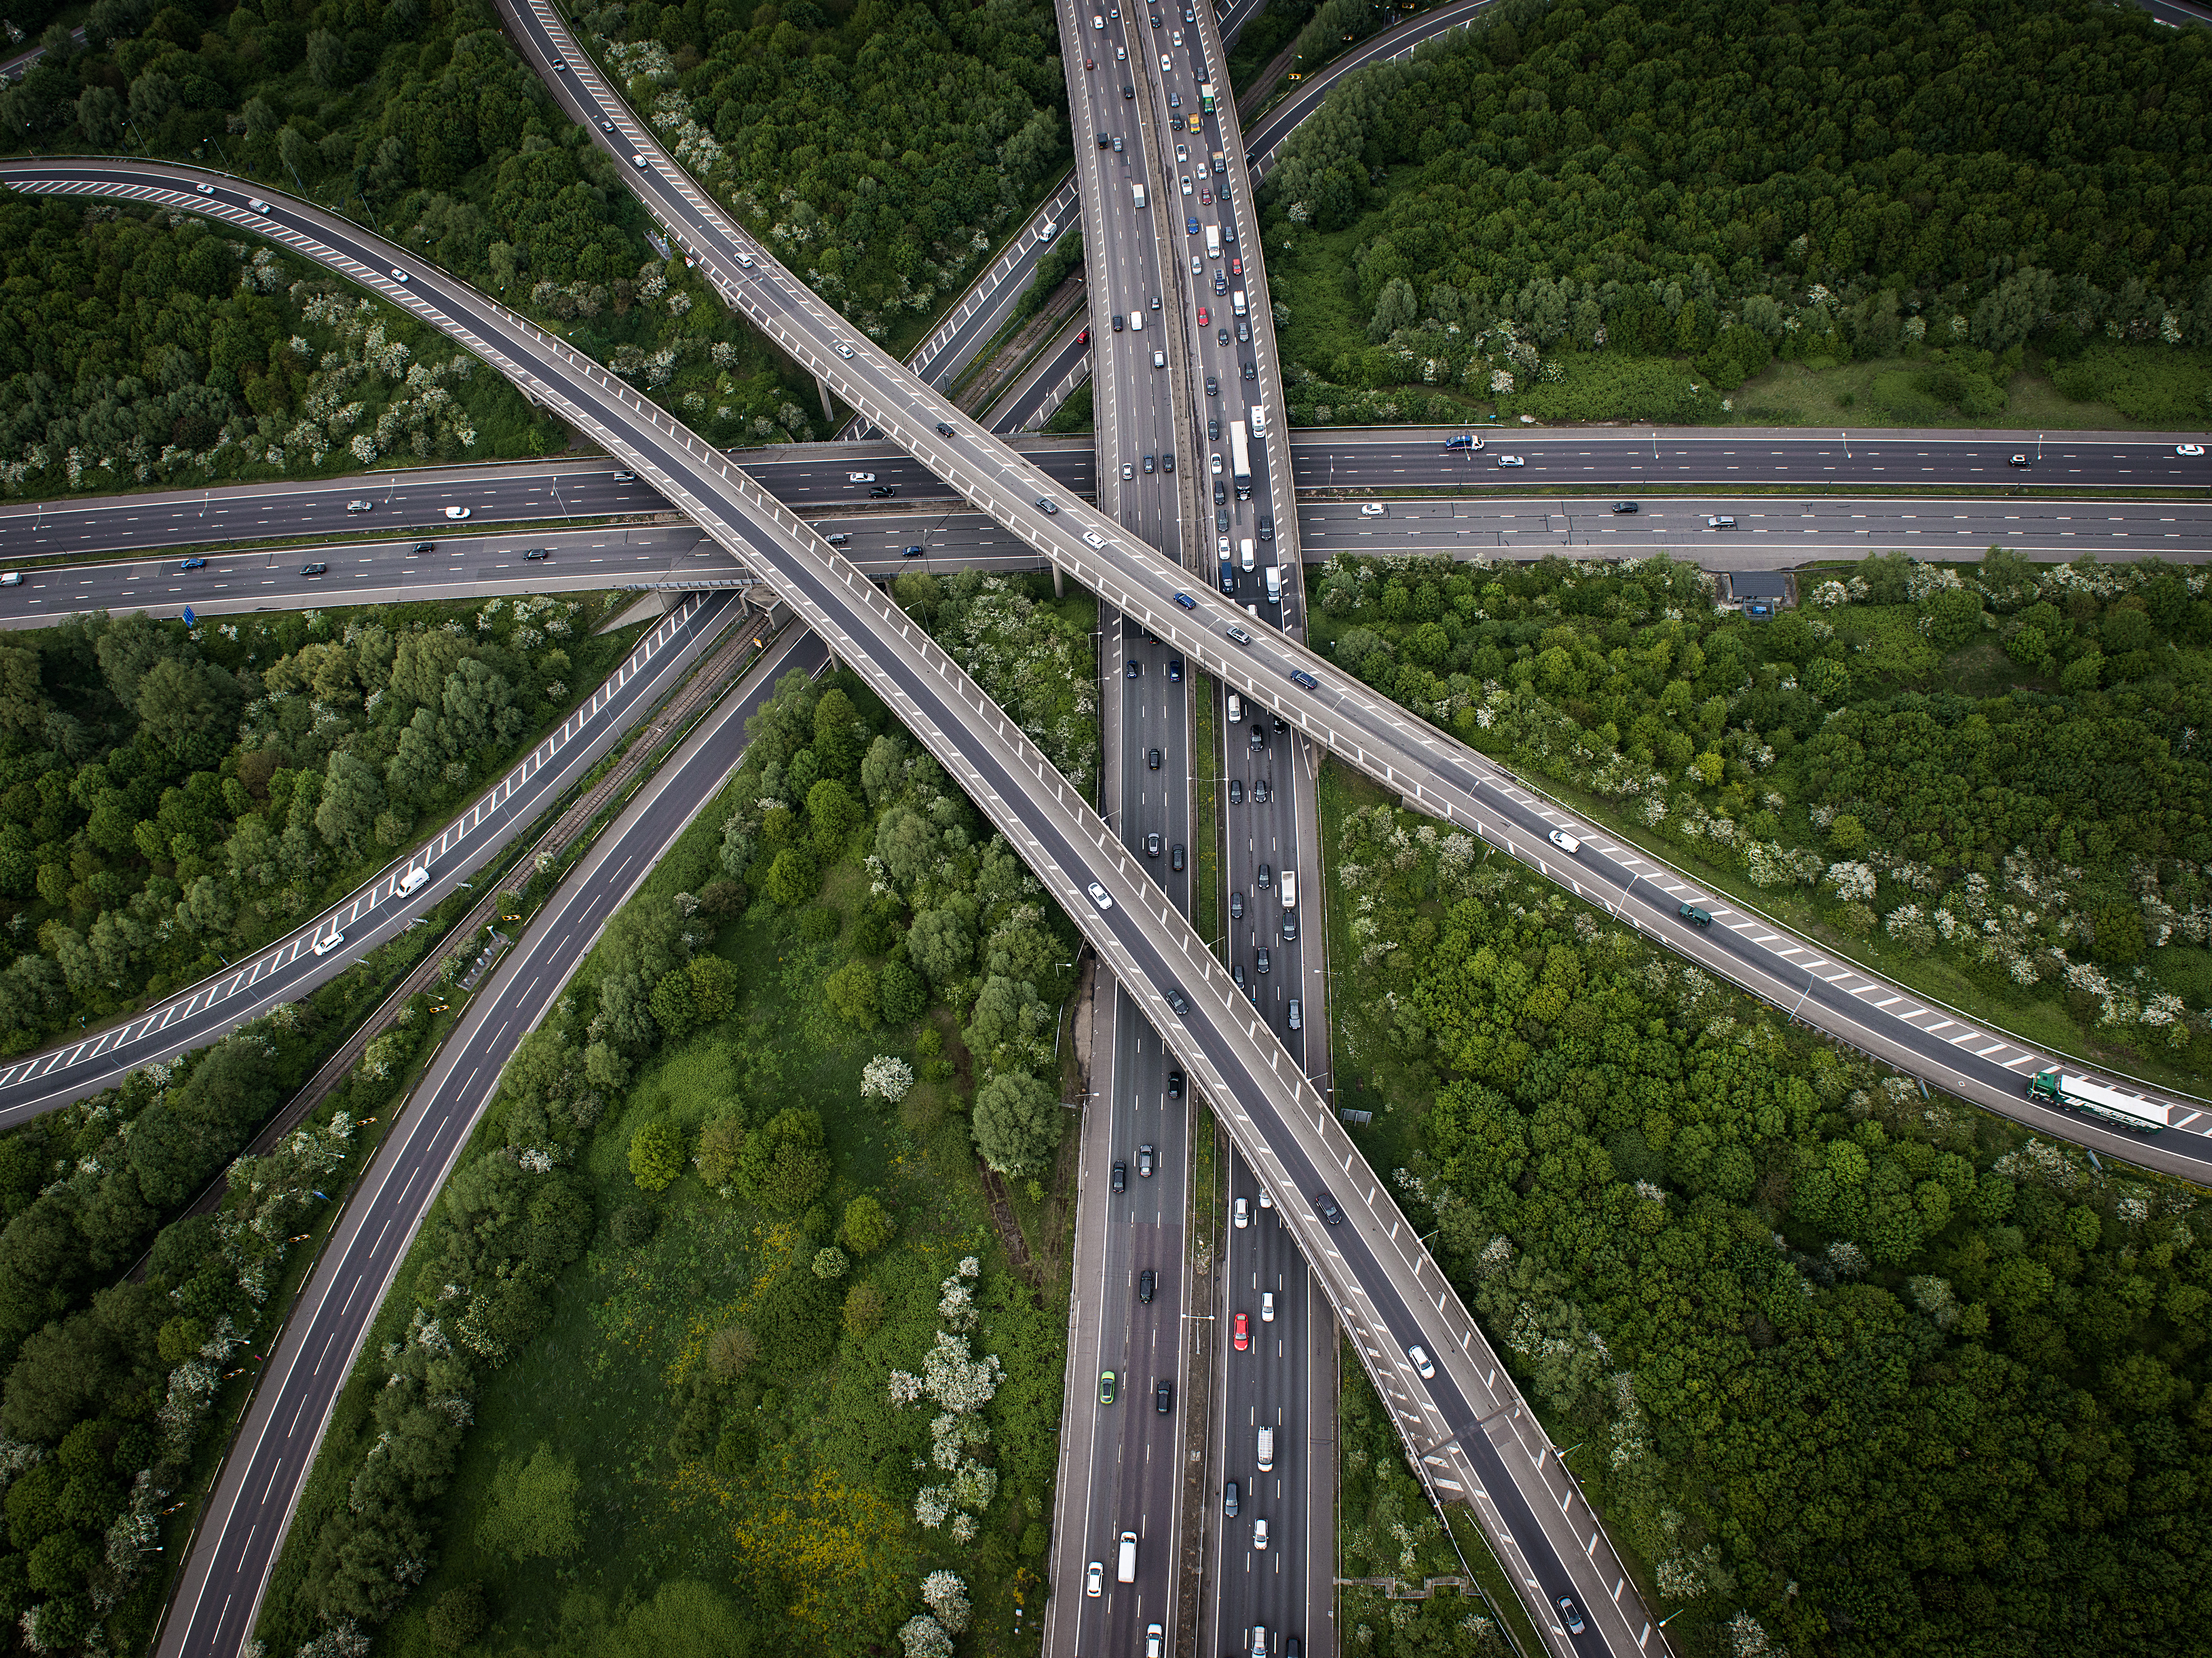 Birds Eye View Crossroads Highway Overpass Viaduct Top View Traffic Drone Photo Trees 5464x4096